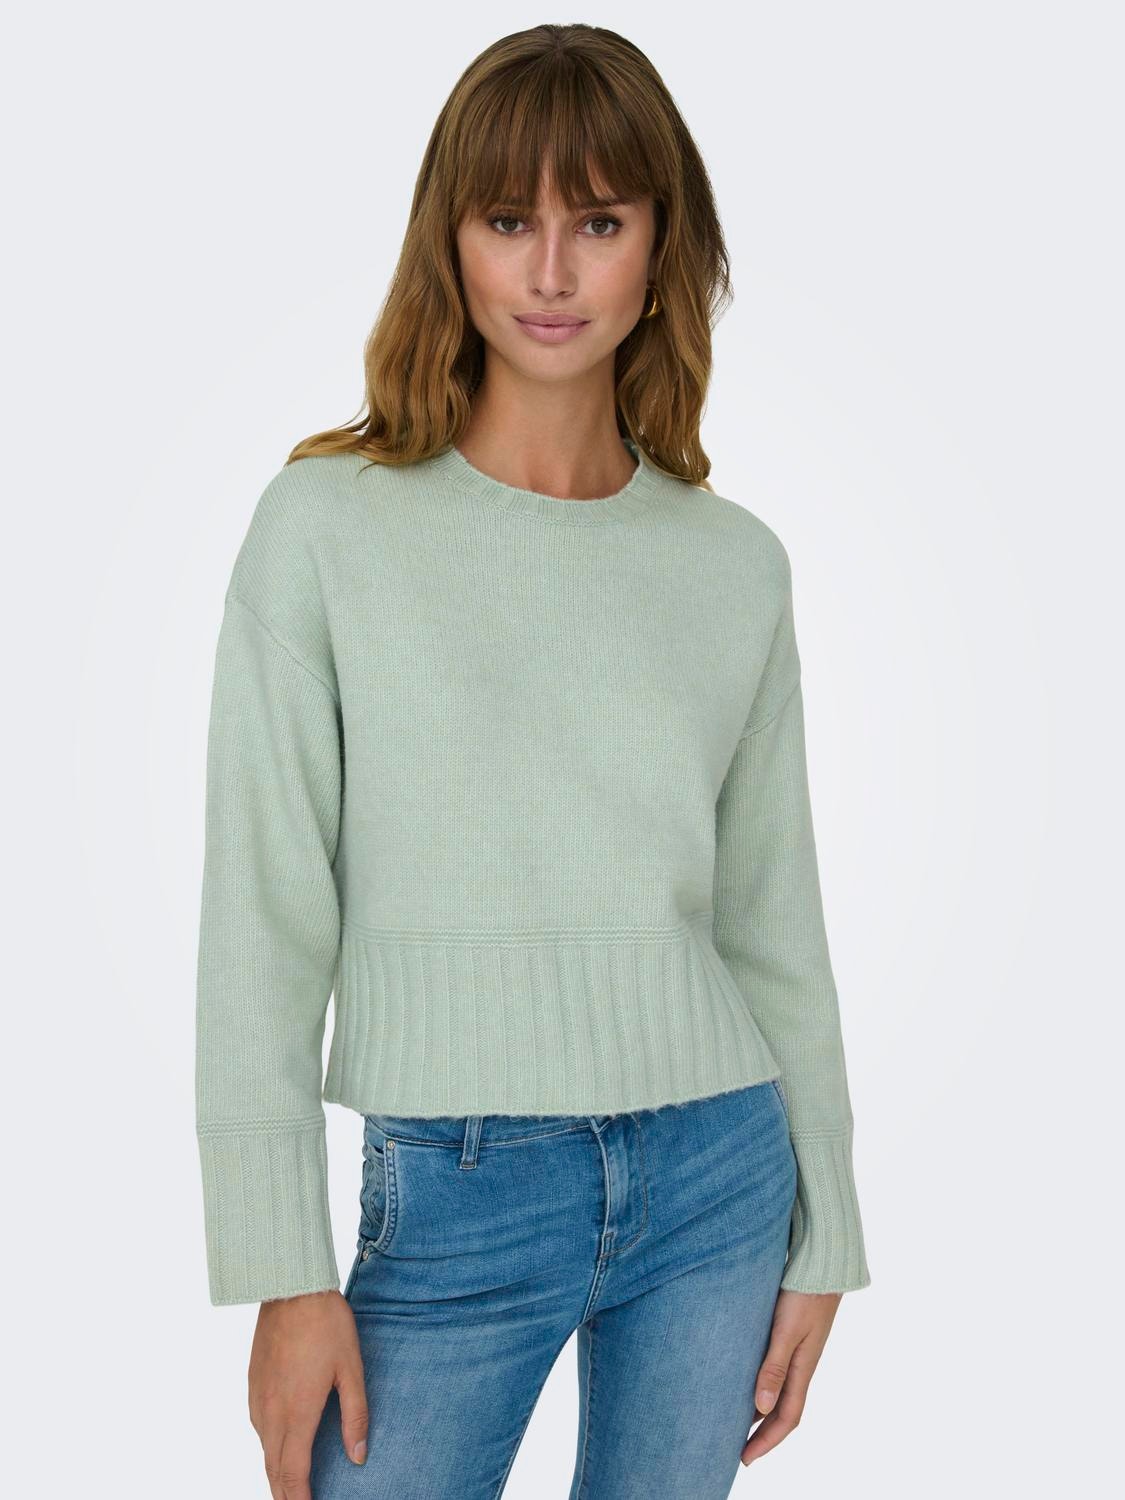 ONLY O-neck knitted pullover -Harbor Gray - 15294484